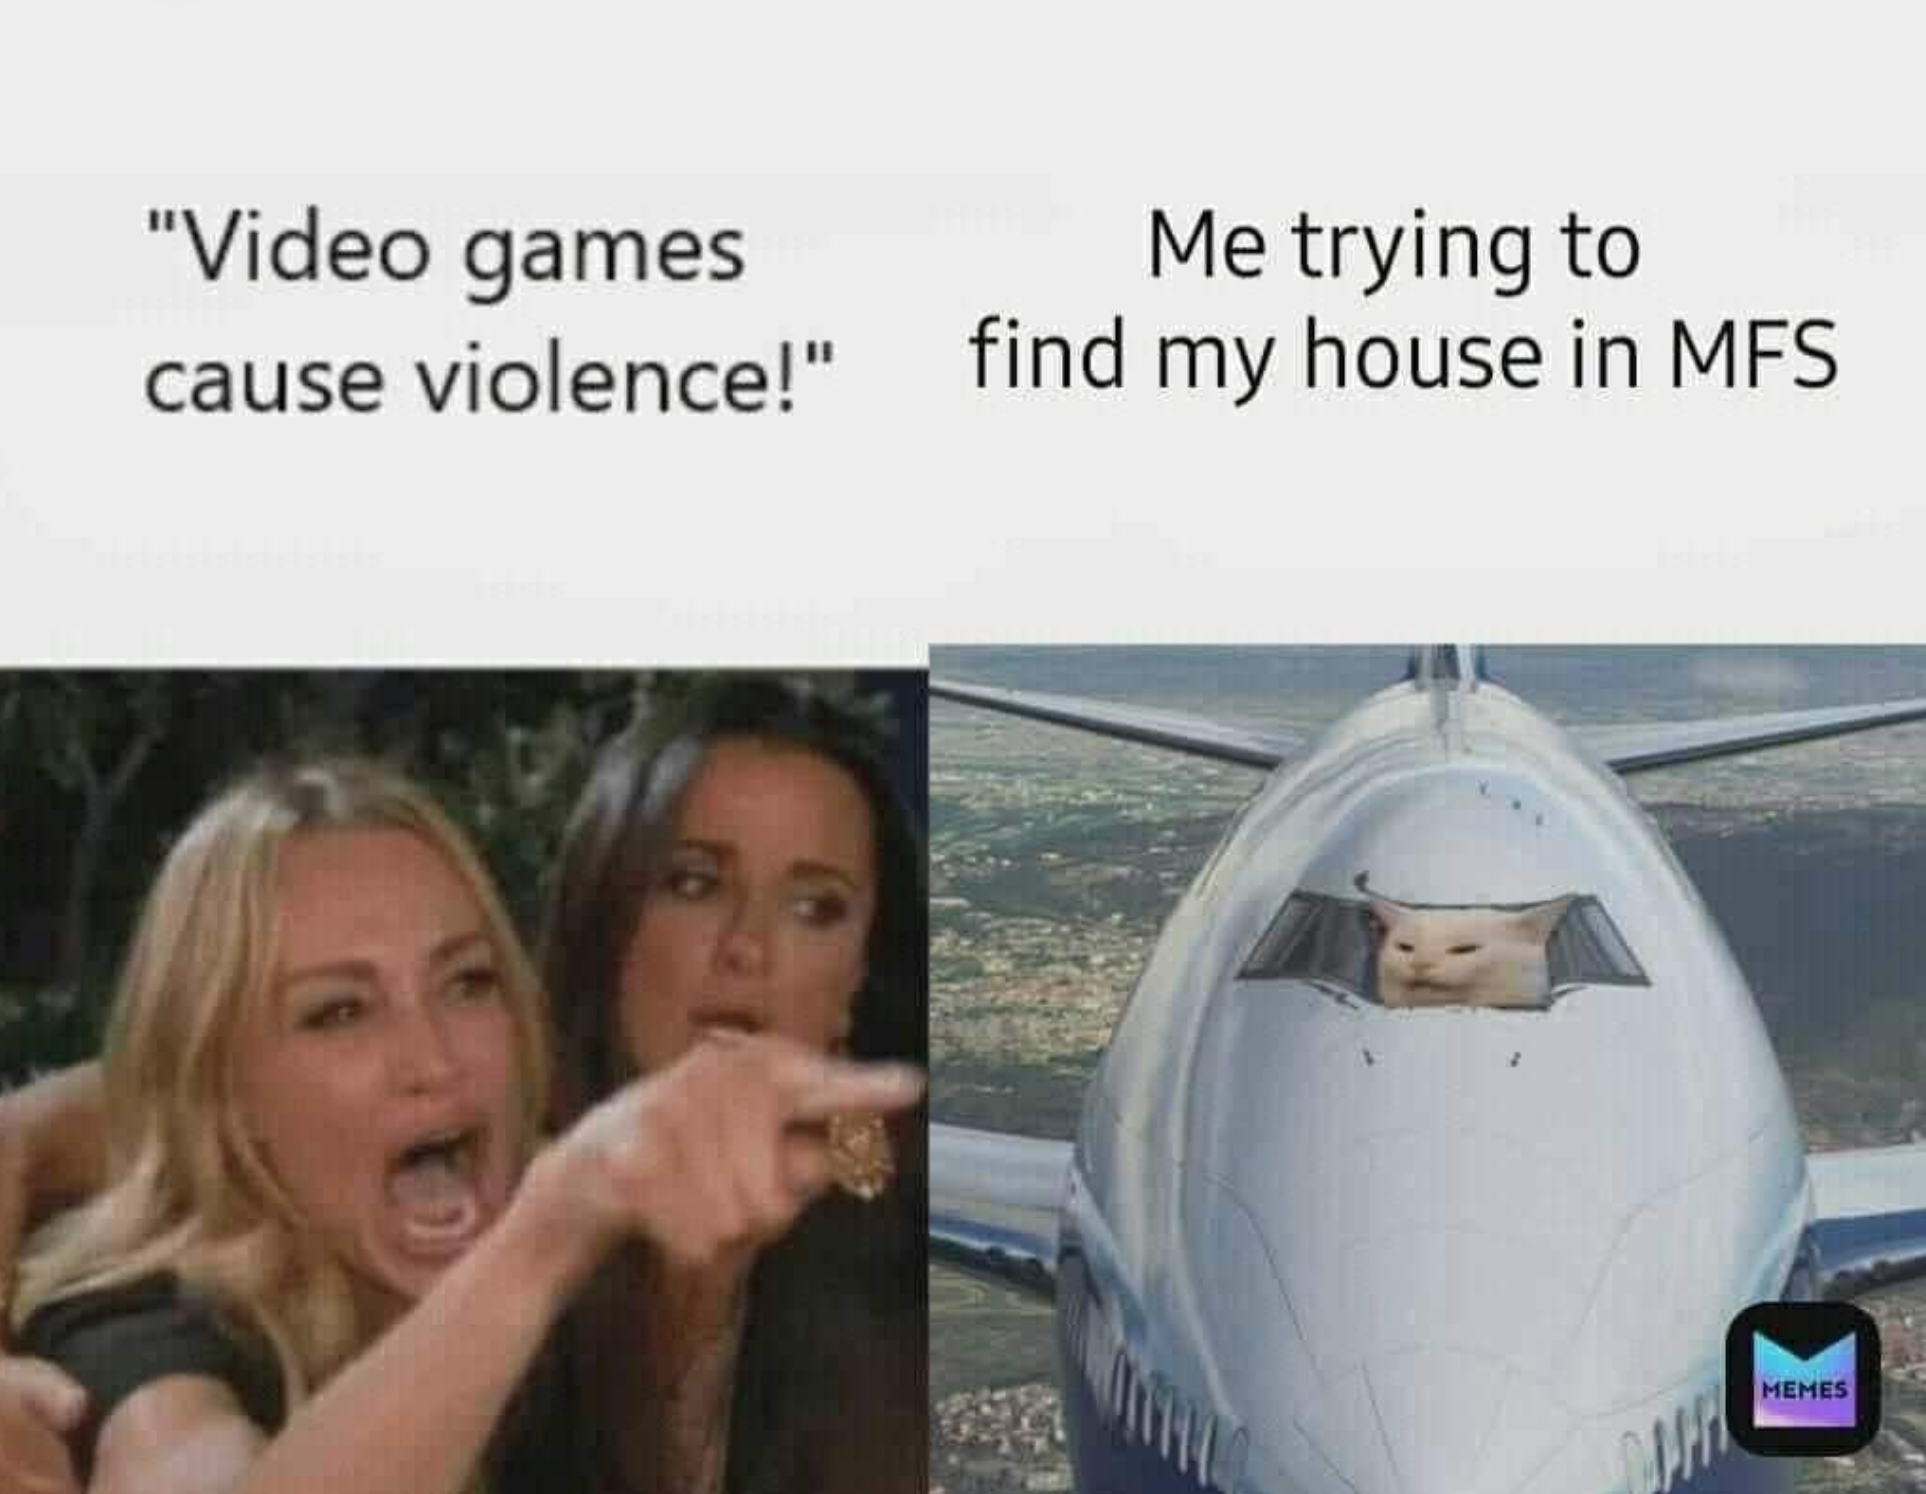 online school memes - "Video games Me trying to cause violence!" find my house in Mes Mehes